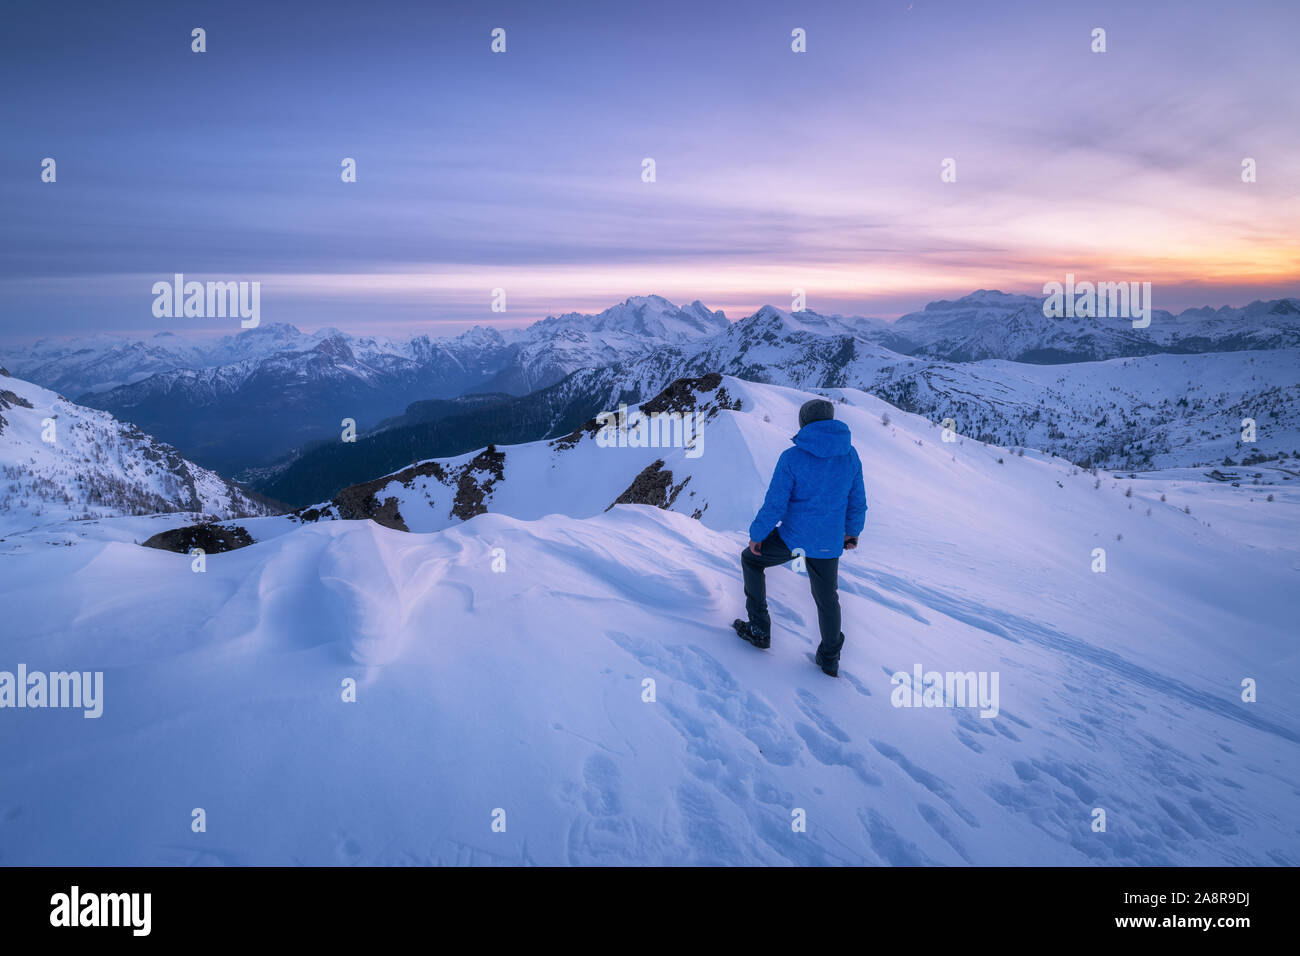 Young woman in snowy mountains at sunset in winter Stock Photo